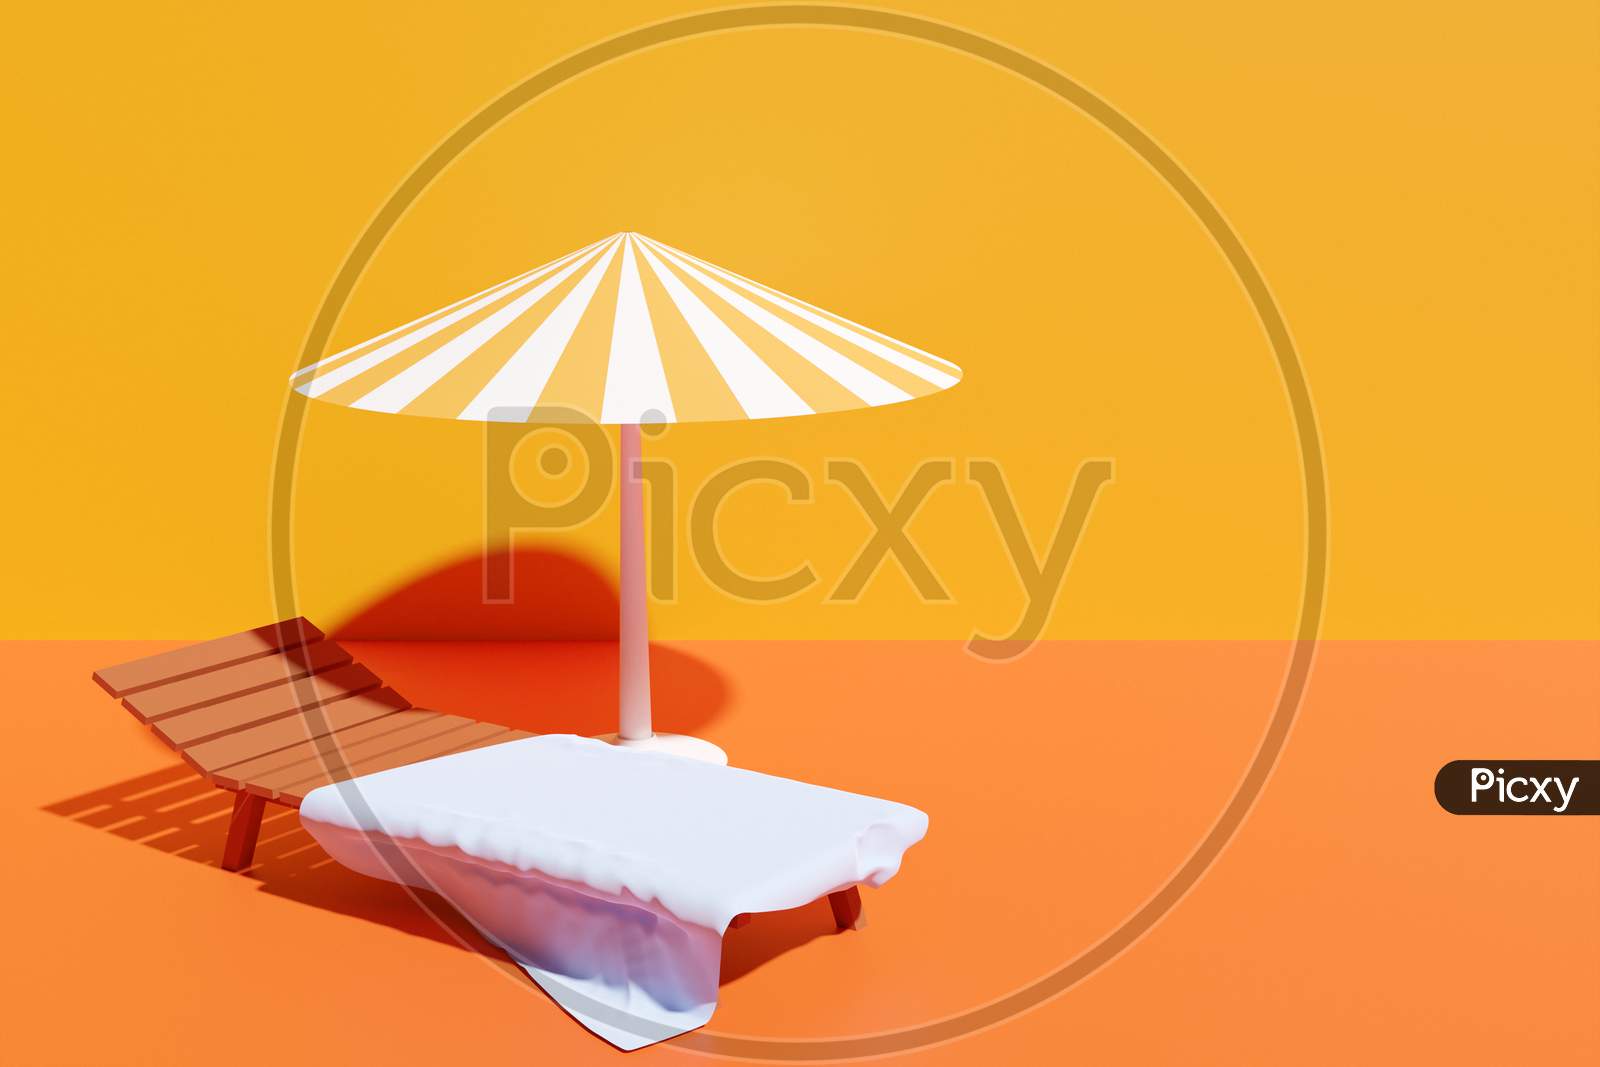 3D Illustration Of A Beach Chair With A White Beach Towel Under A Striped Parasol, On An Isolated Orange Background.Summer Vacation Concept By The Beach. Summer Minimalistic Background